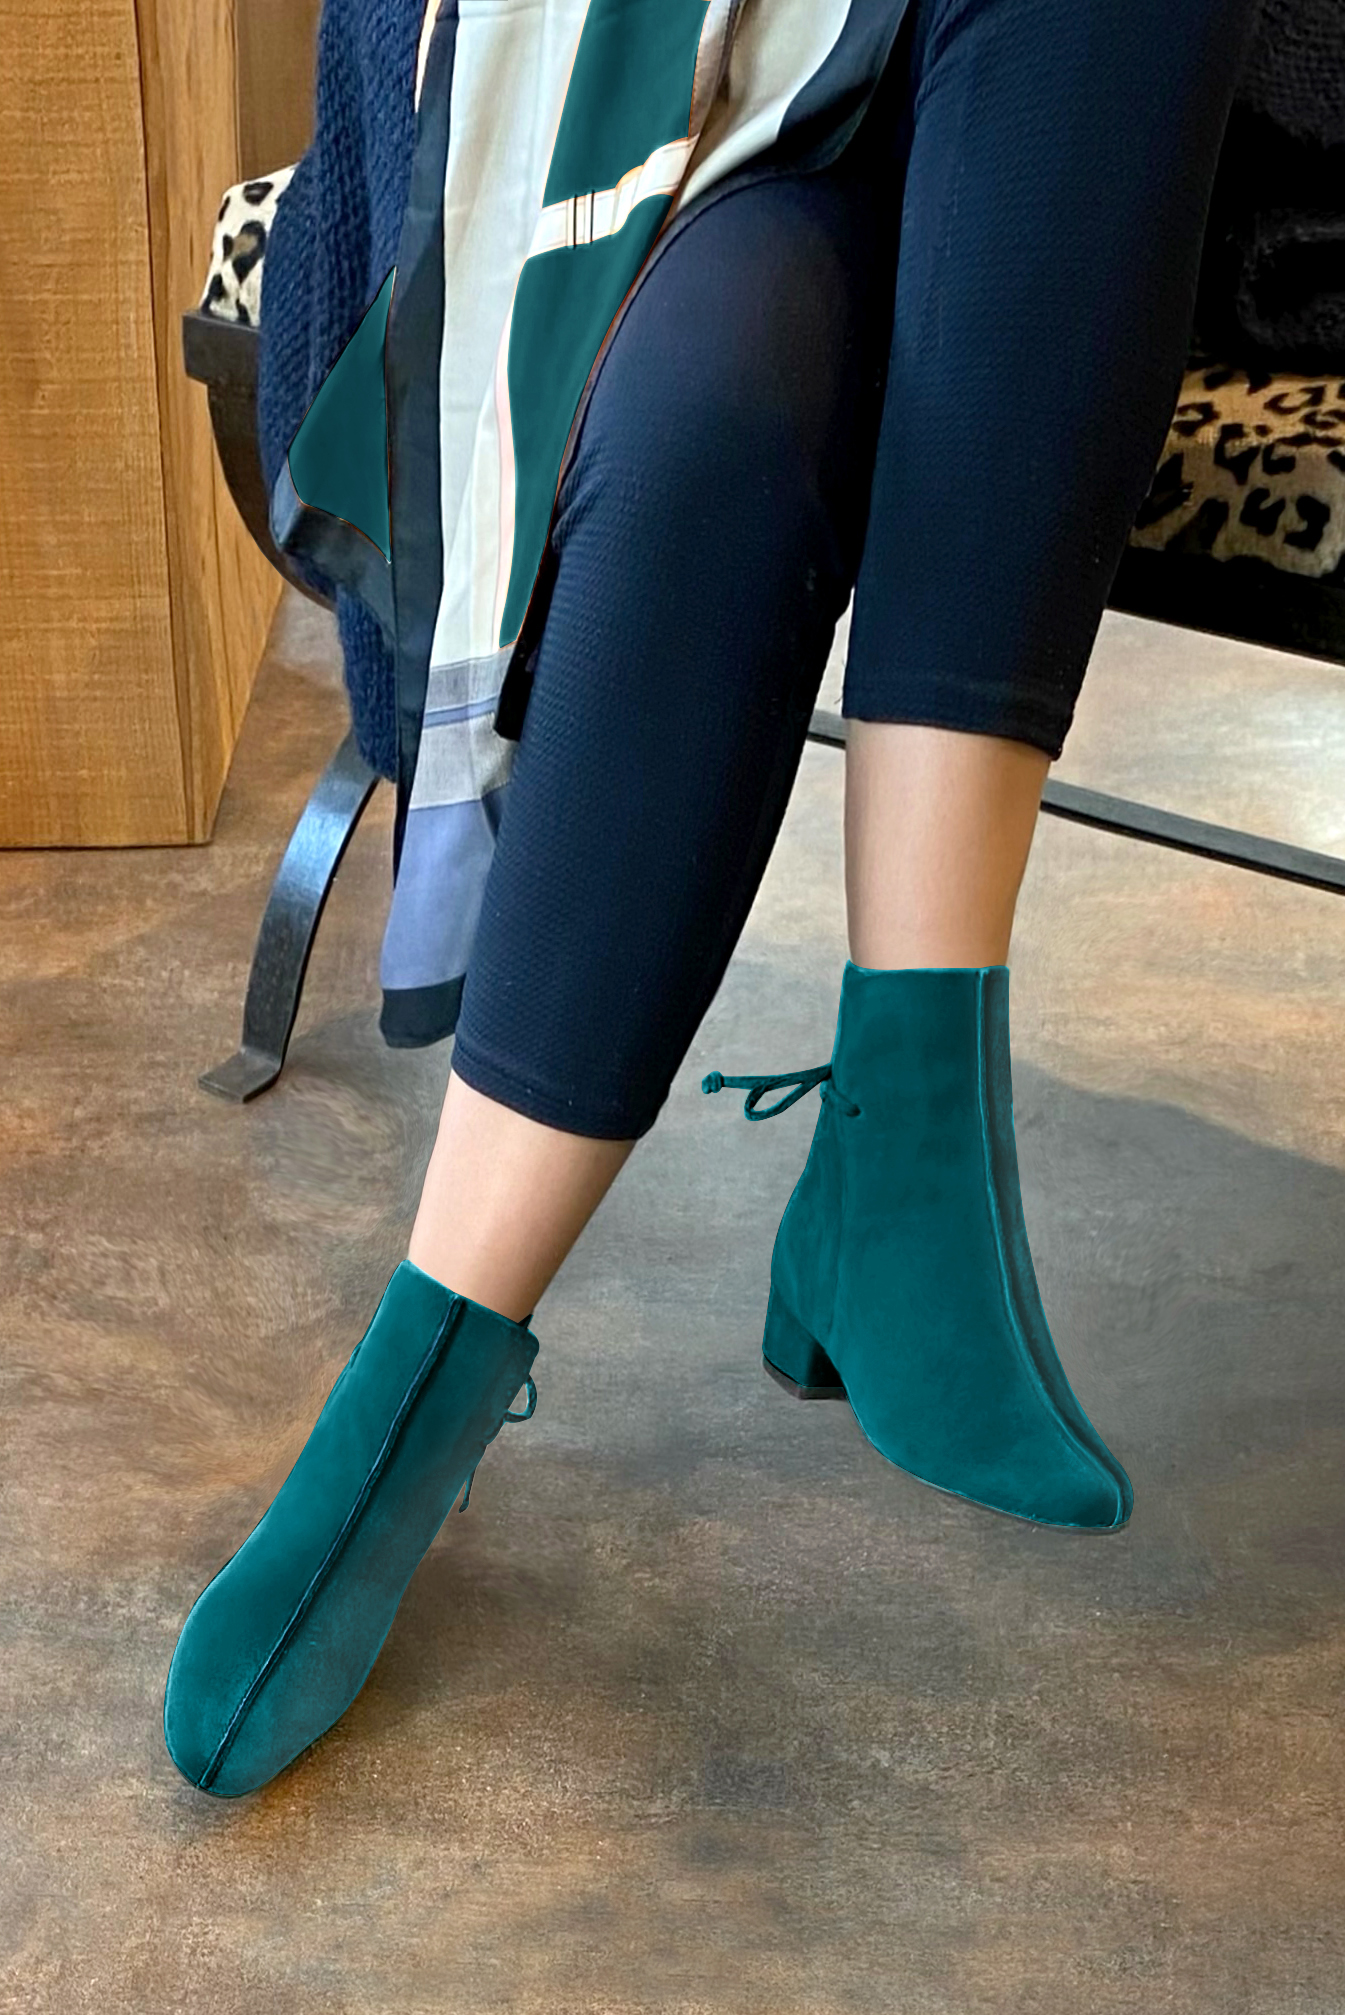 Peacock blue women's ankle boots with laces at the back. Round toe. Low block heels. Worn view - Florence KOOIJMAN